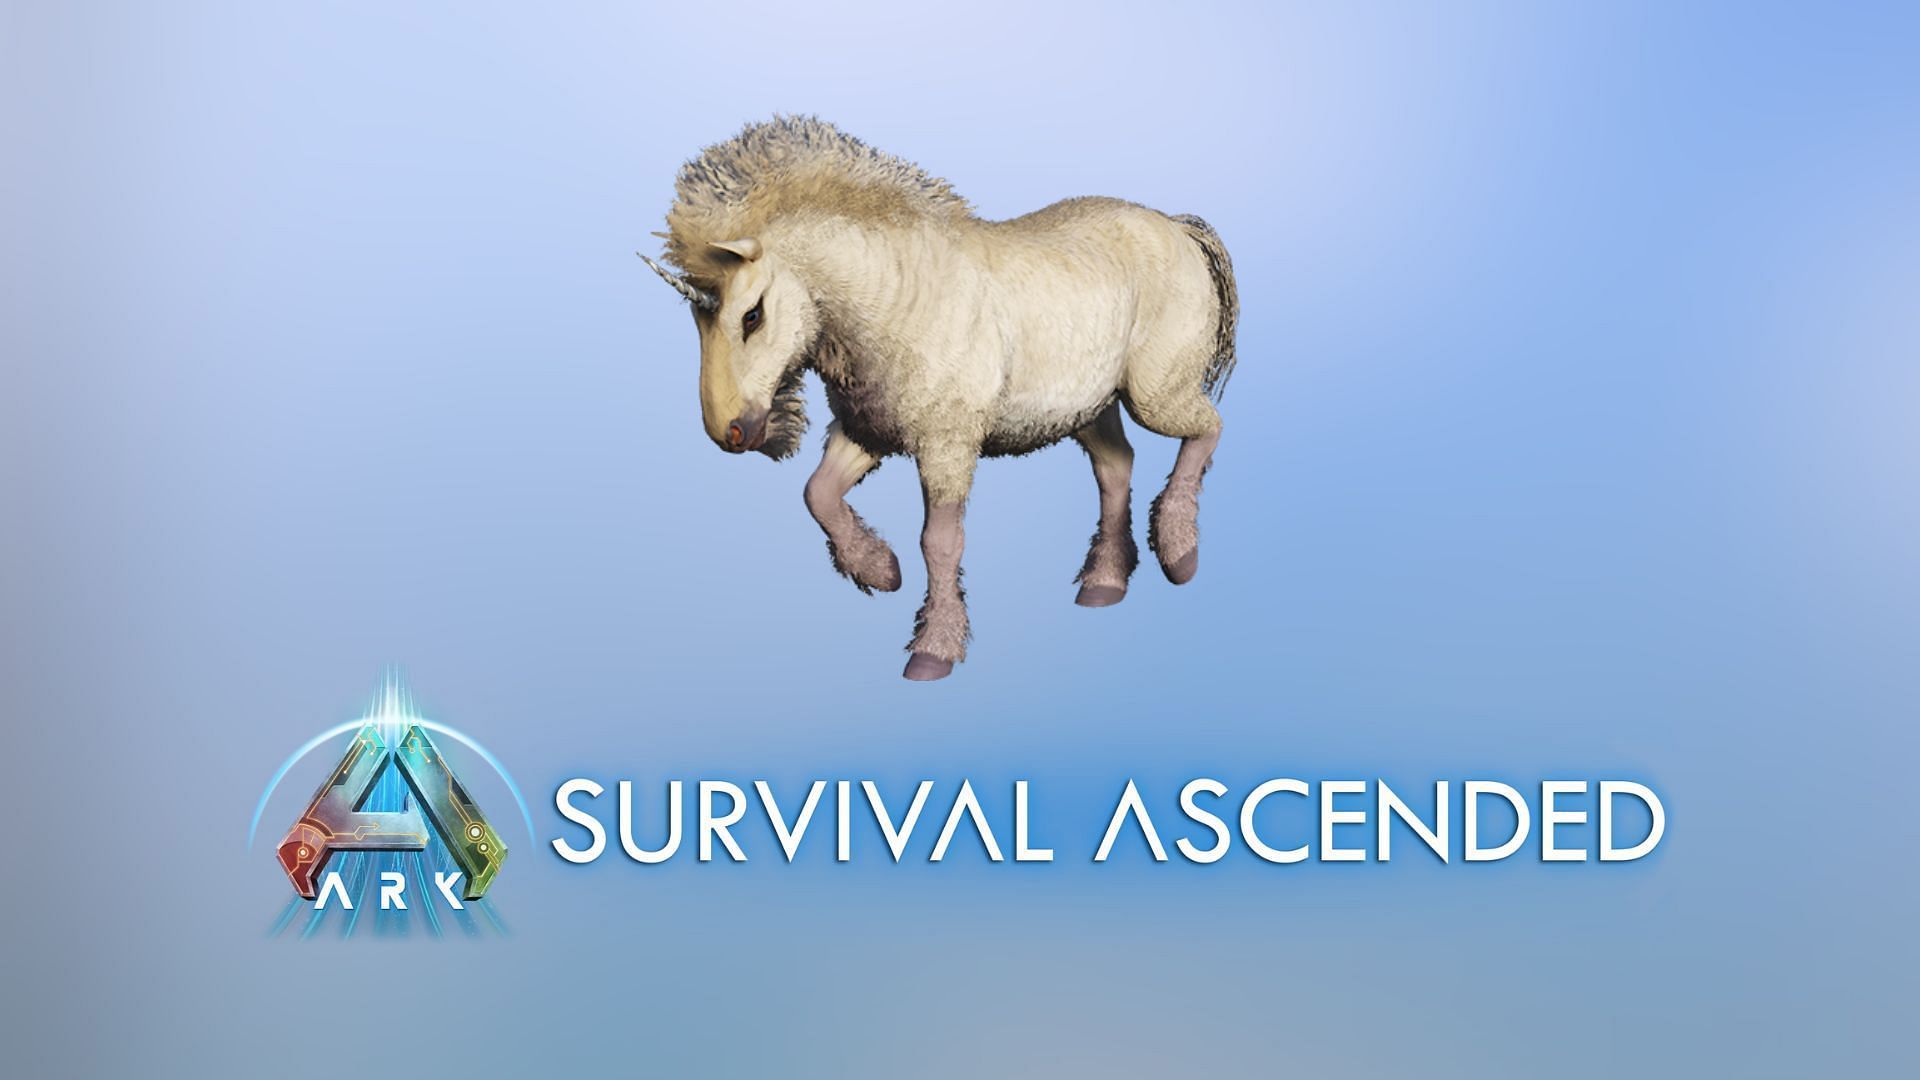 The Unicorn is one of the rarest creatures in Ark Survival Ascended (Image via Studio Wildcard)